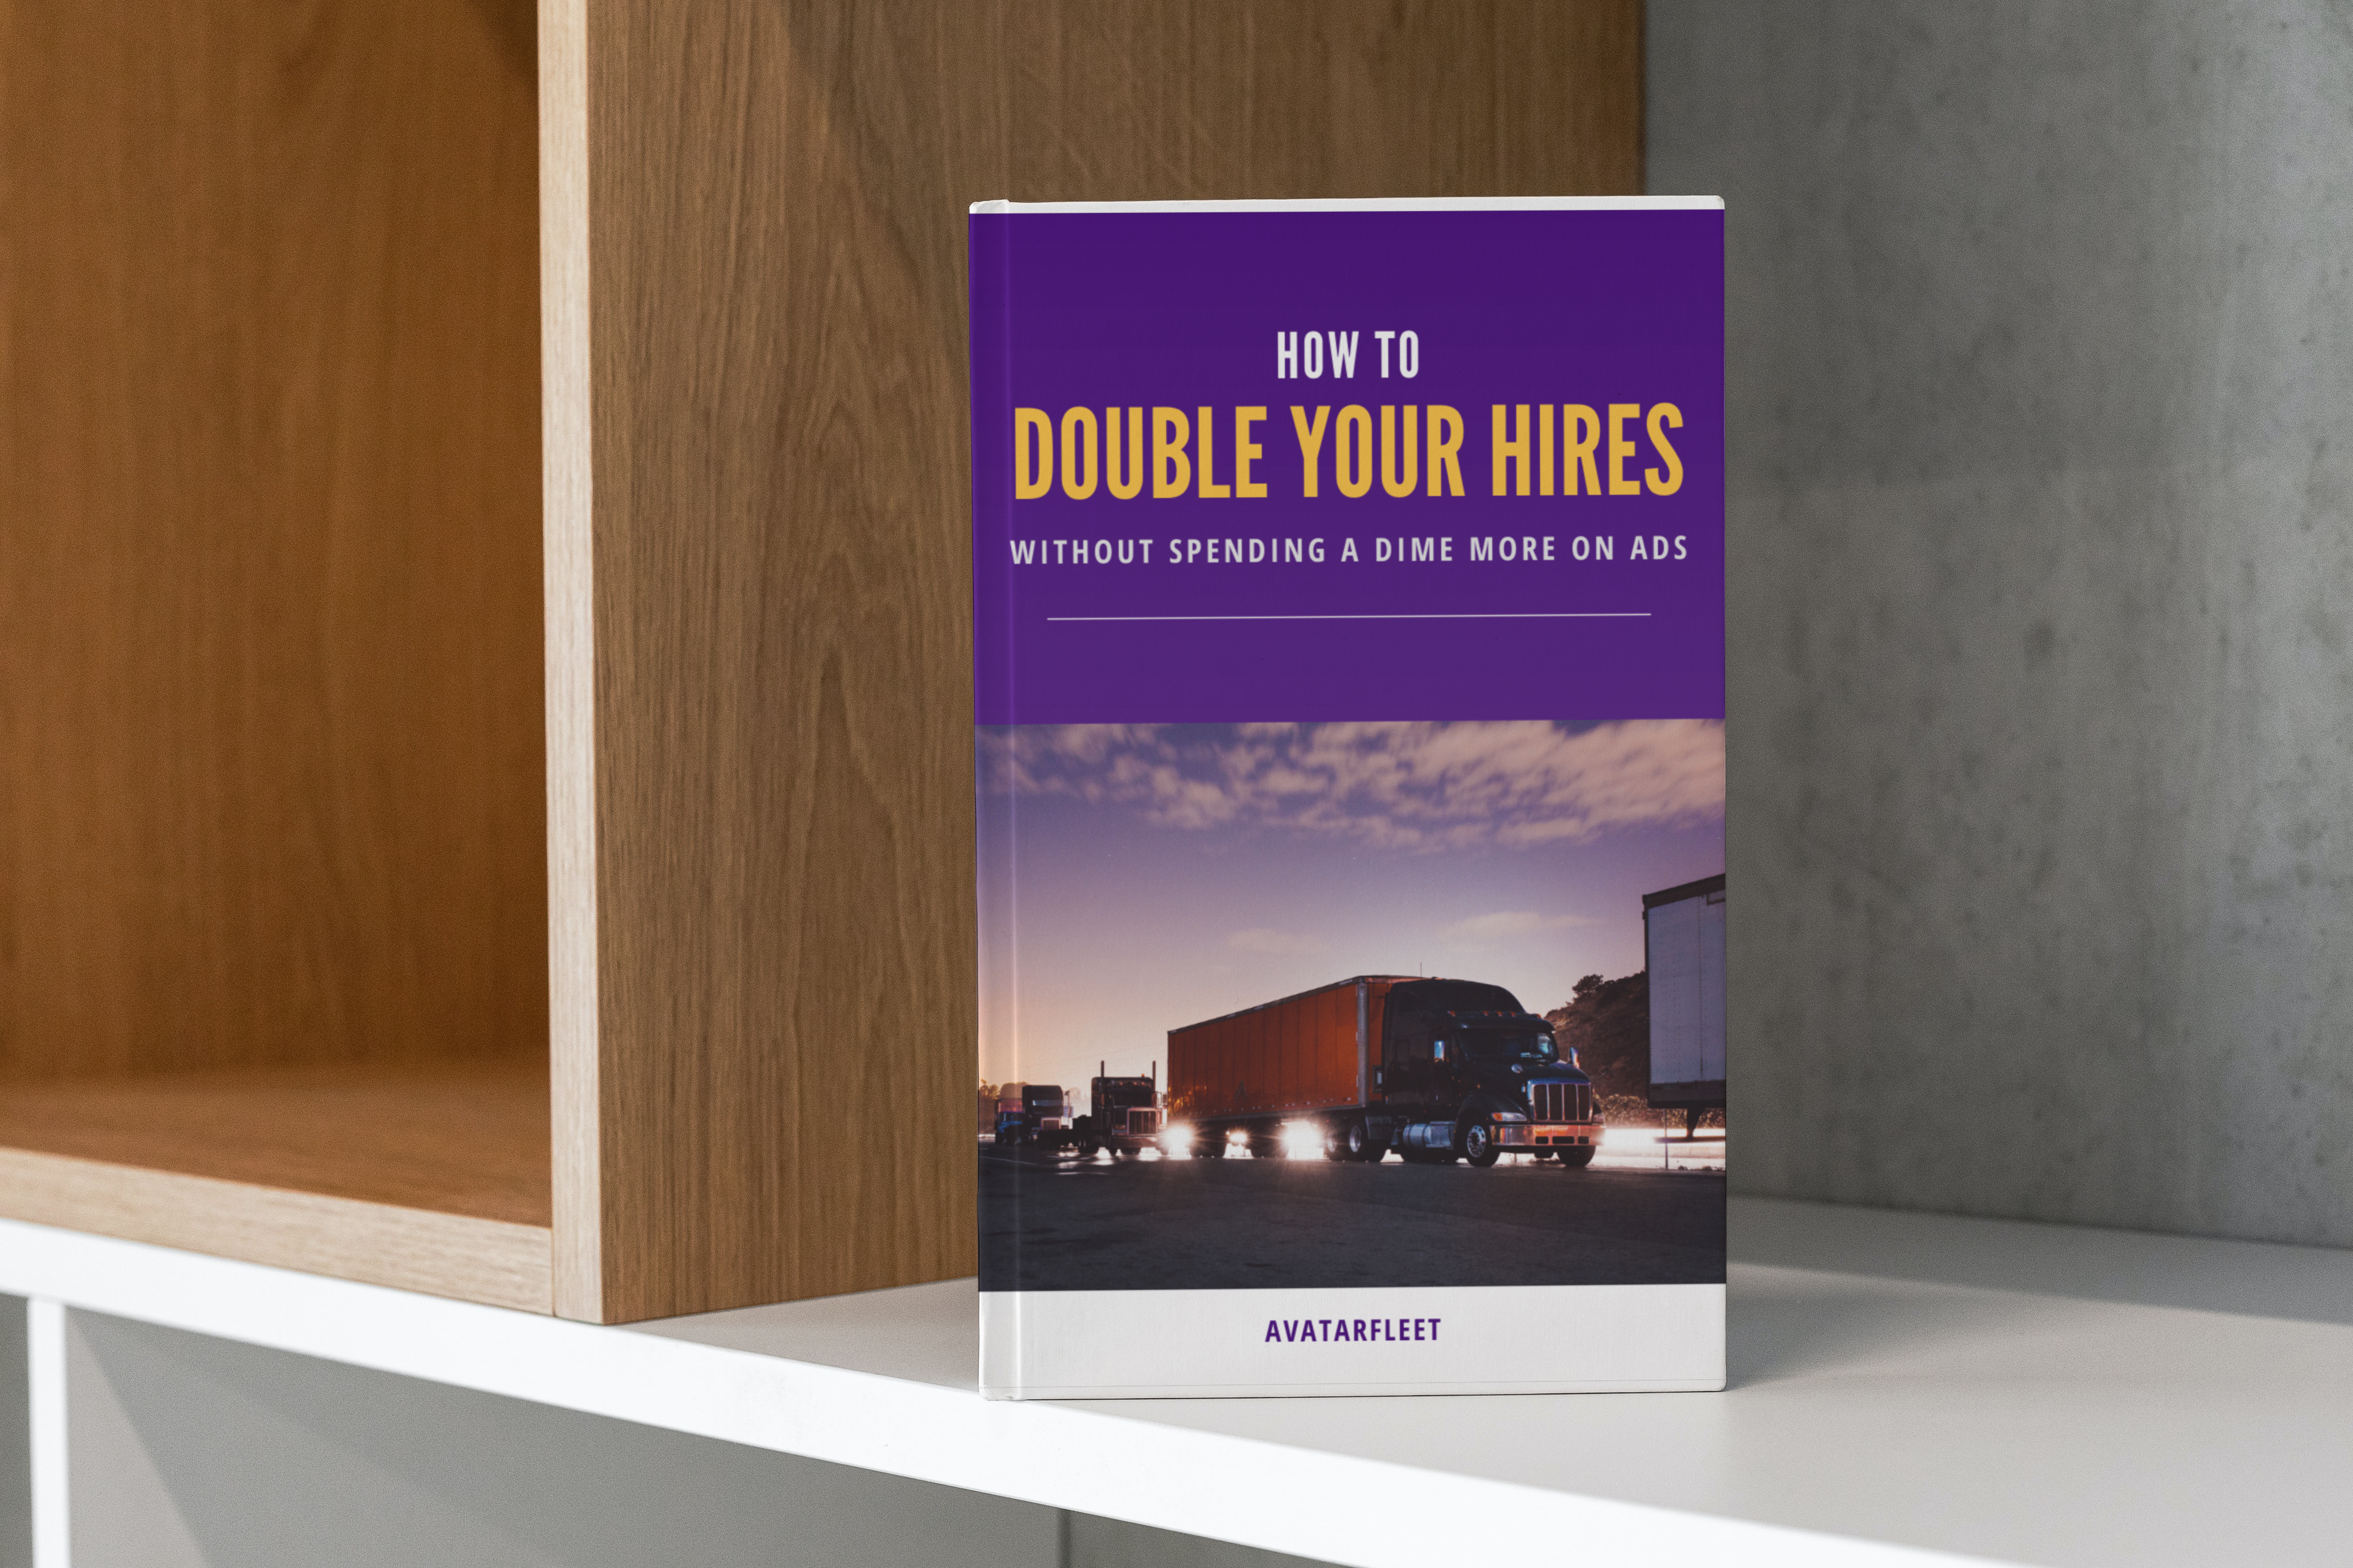 How to Double Your Hires Without Spending a Dime More on Ads